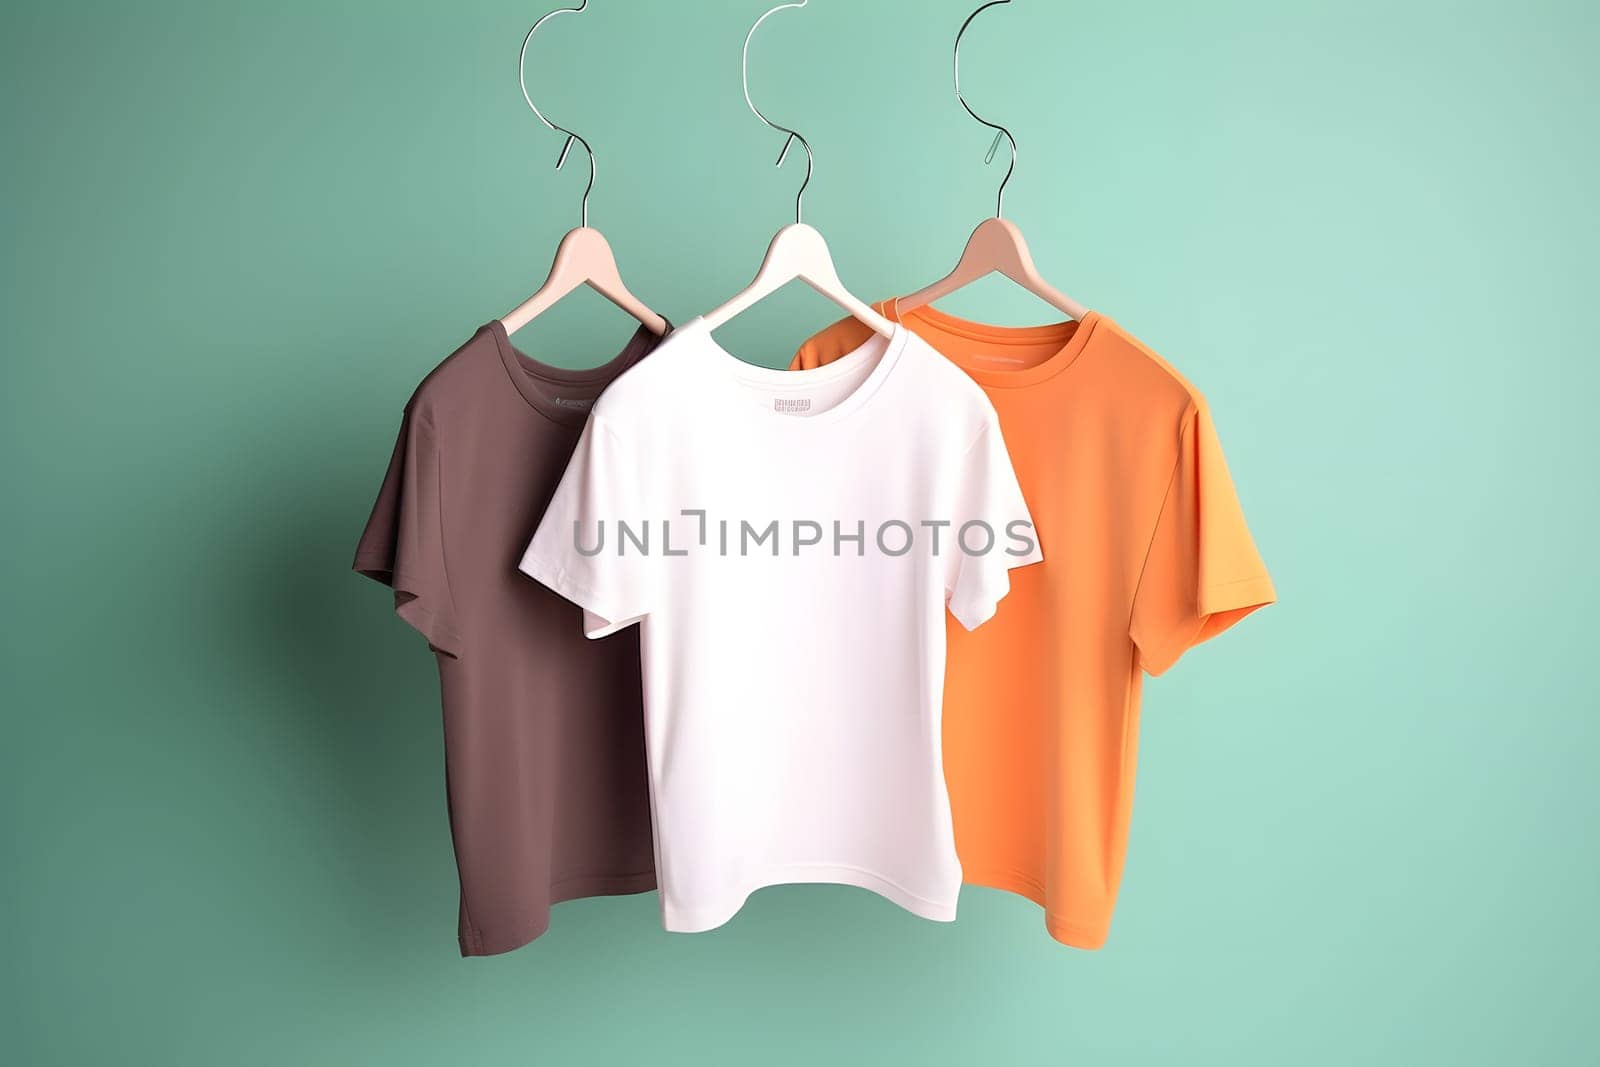 Hangers with blank monocolor t-shirts on turquoise background, neural network generated image by z1b